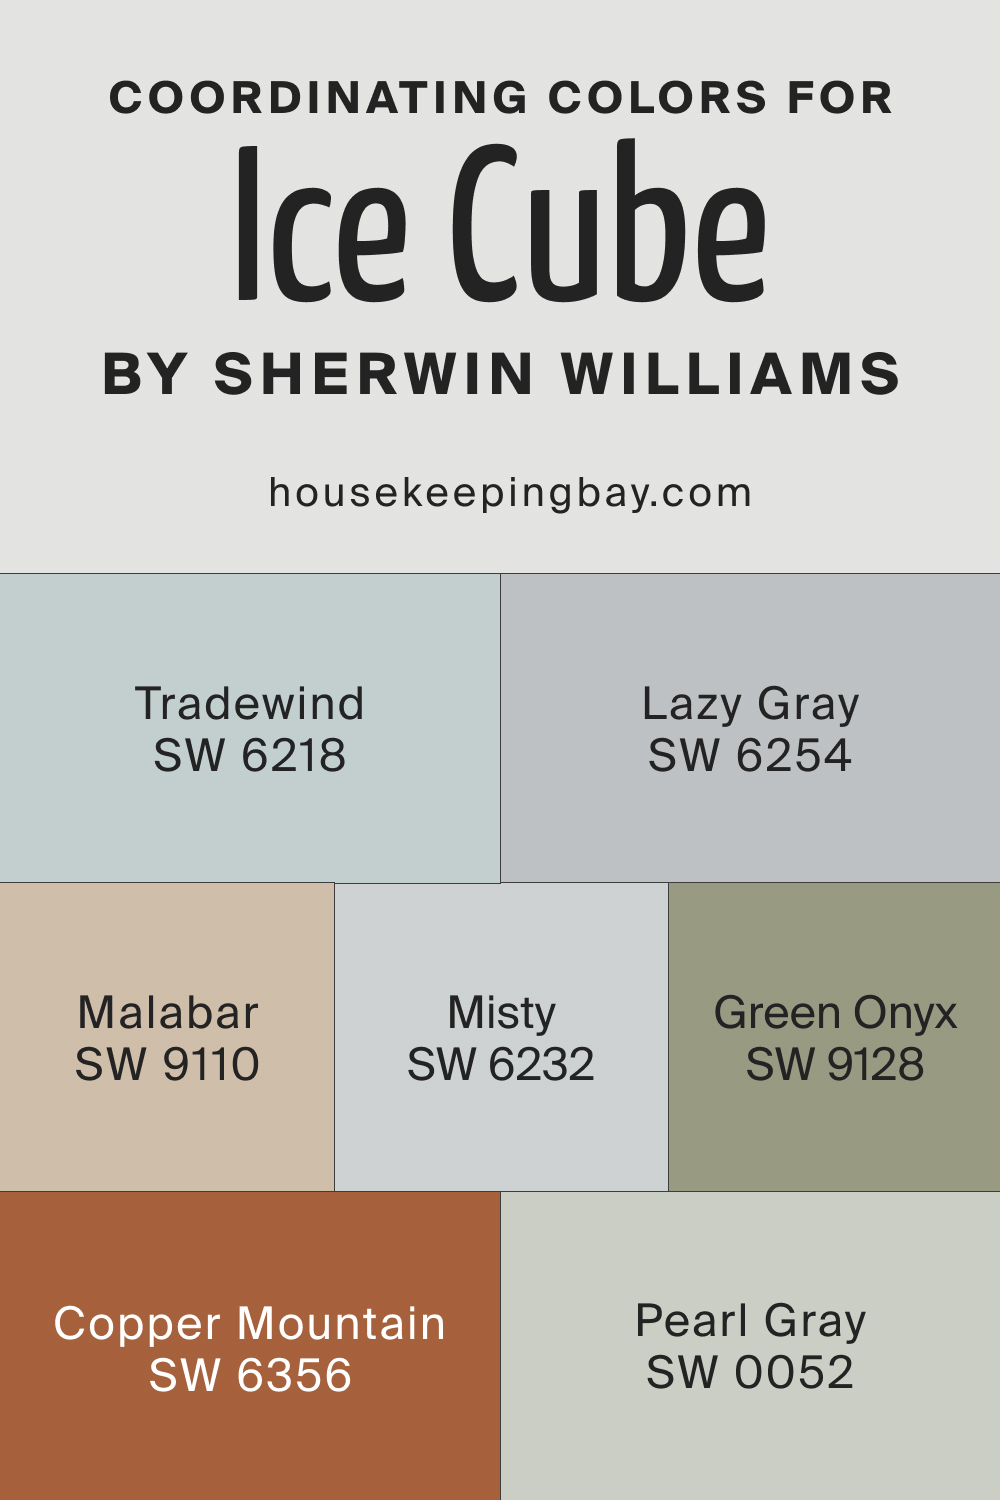 Coordinating Colors for SW 6252 Ice Cube by Sherwin Williams